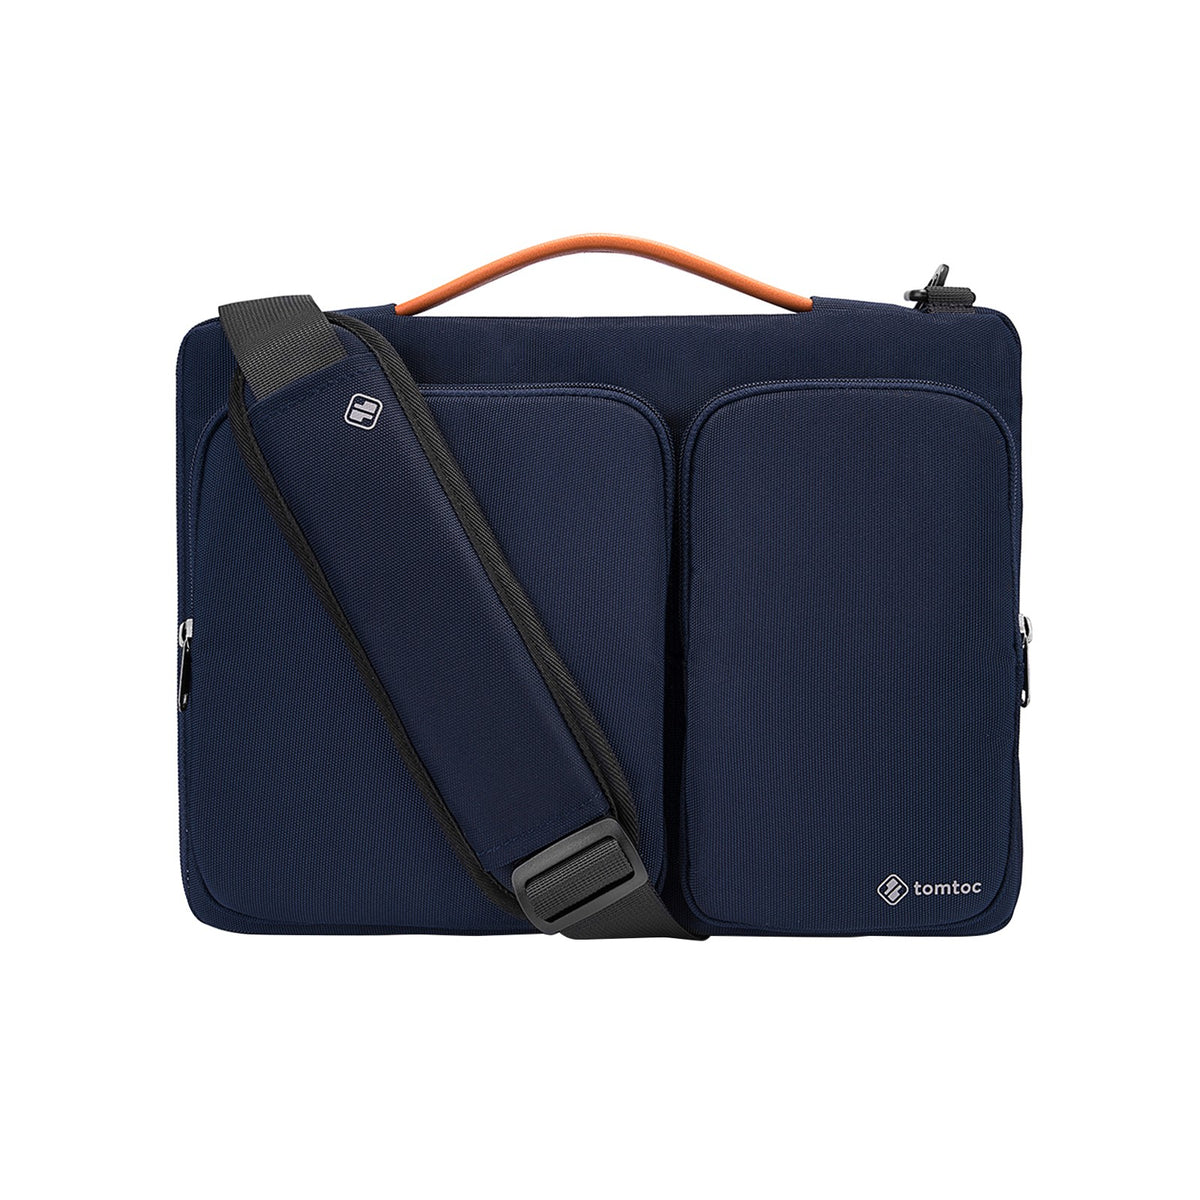 primary_Defender-A42 Laptop Briefcase For 13-inch MacBook Pro & Air | Navy Blue